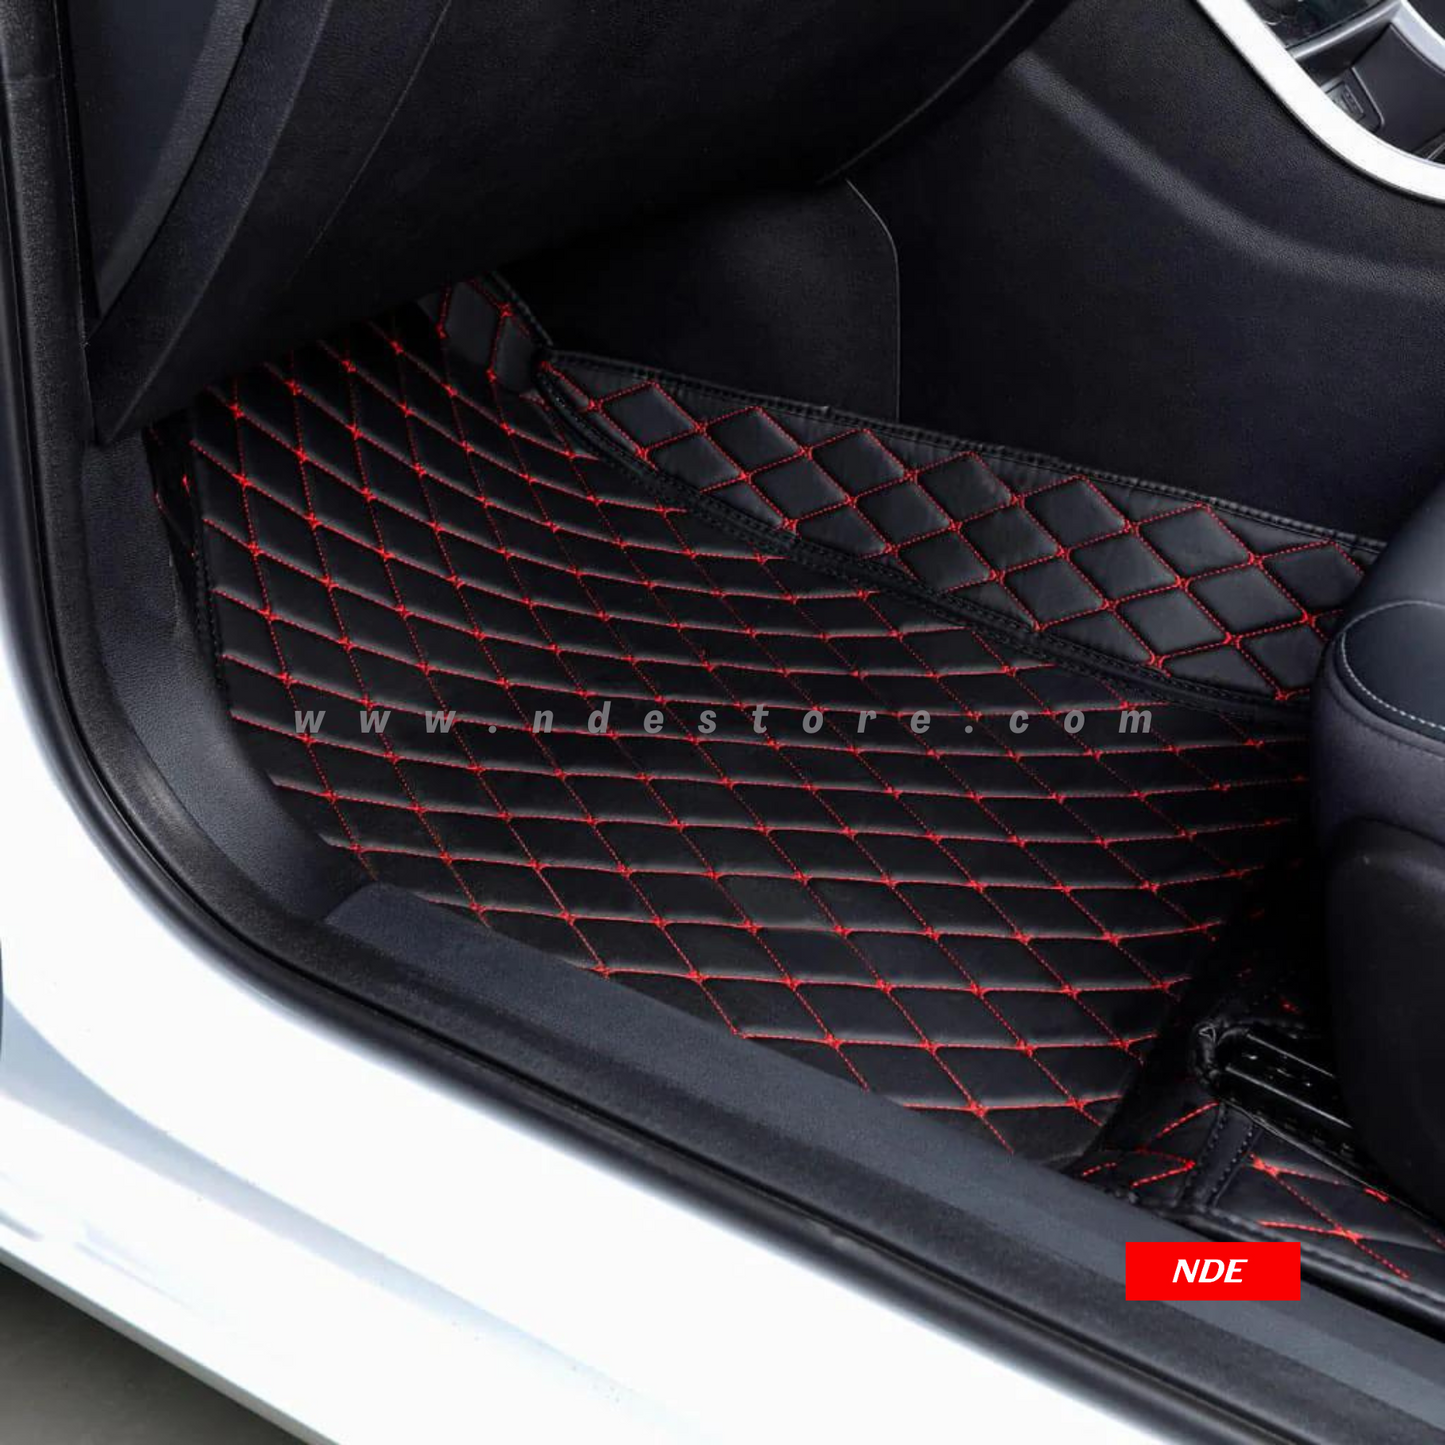 FLOOR MAT 7D STYLE FOR KIA PICANTO